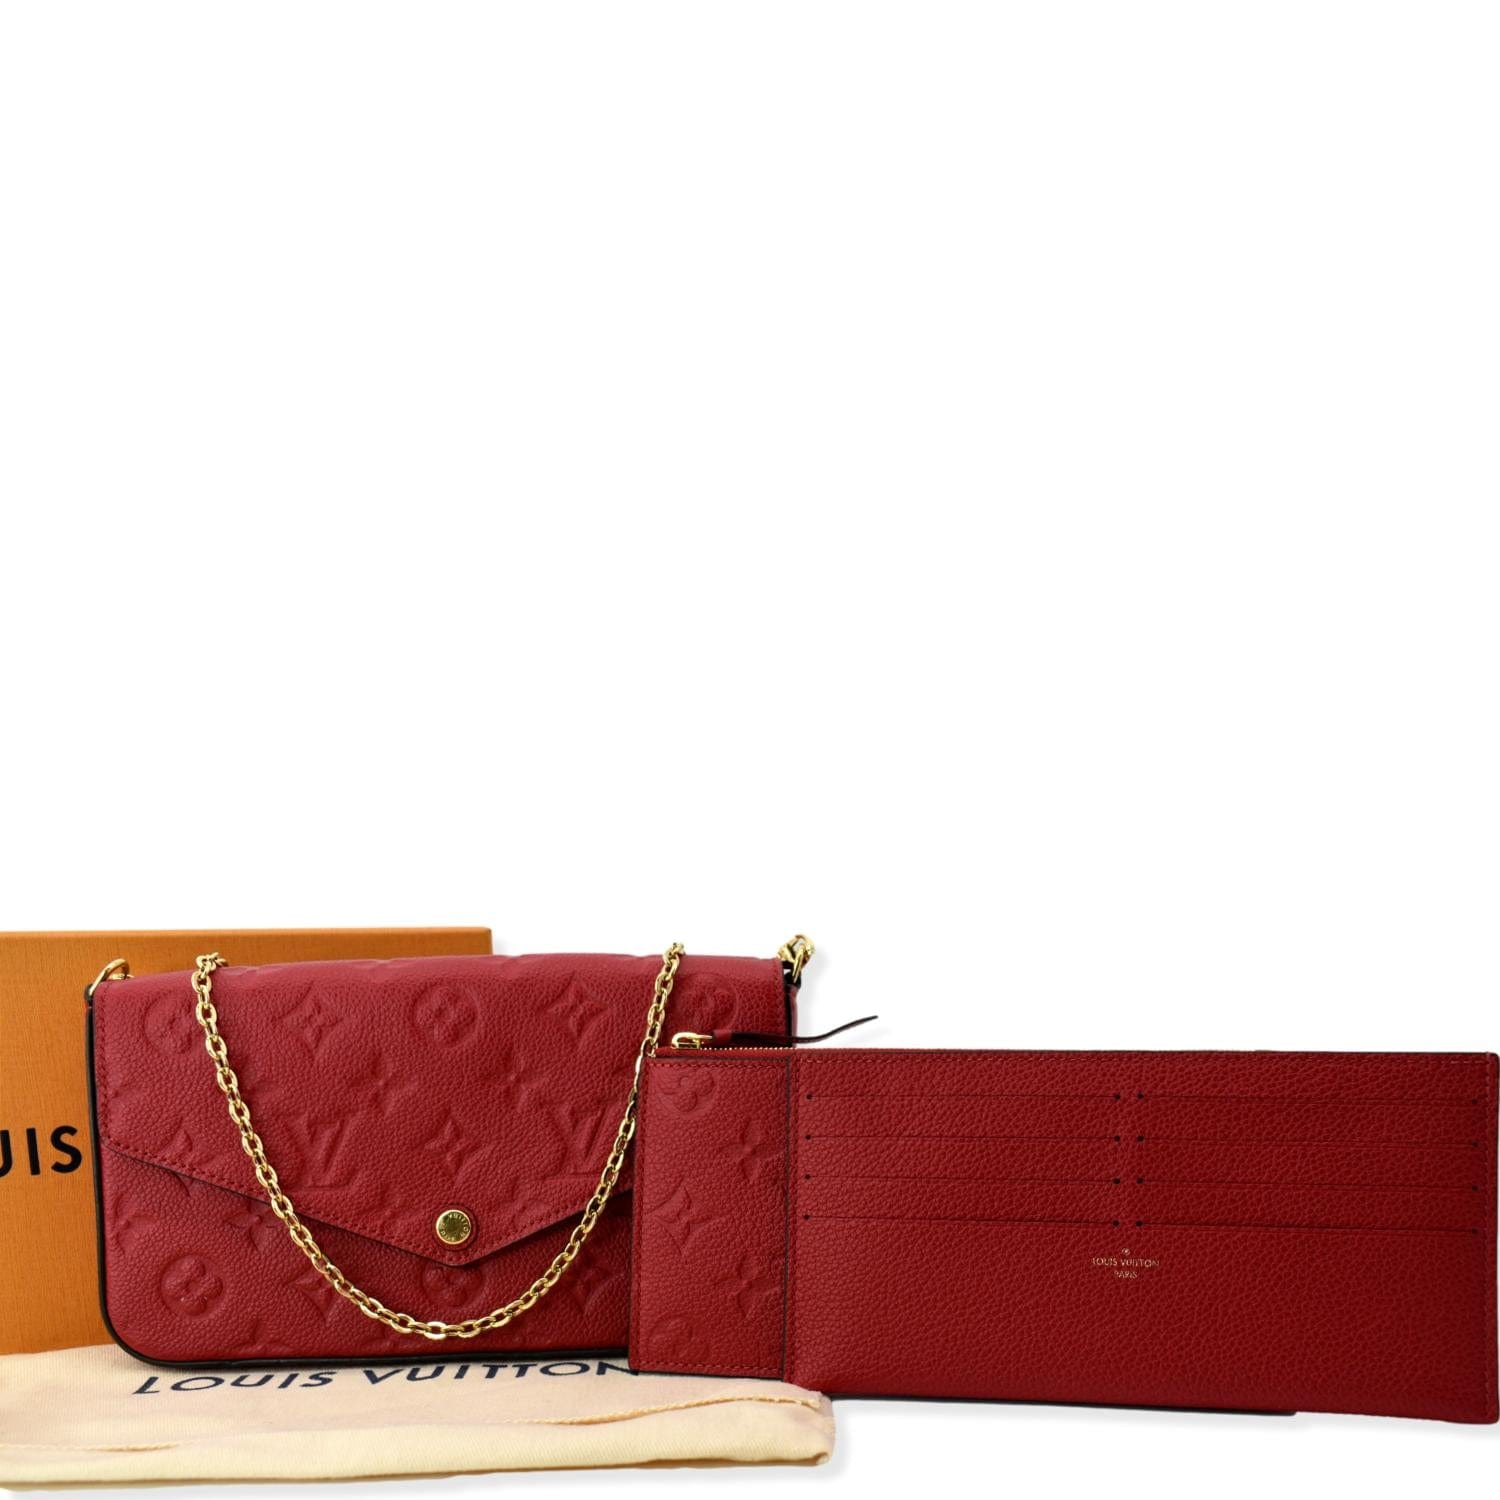 Buy Louis Vuitton Credit Card Cerise Red Insert From Felicie Pochette Wallet  A952